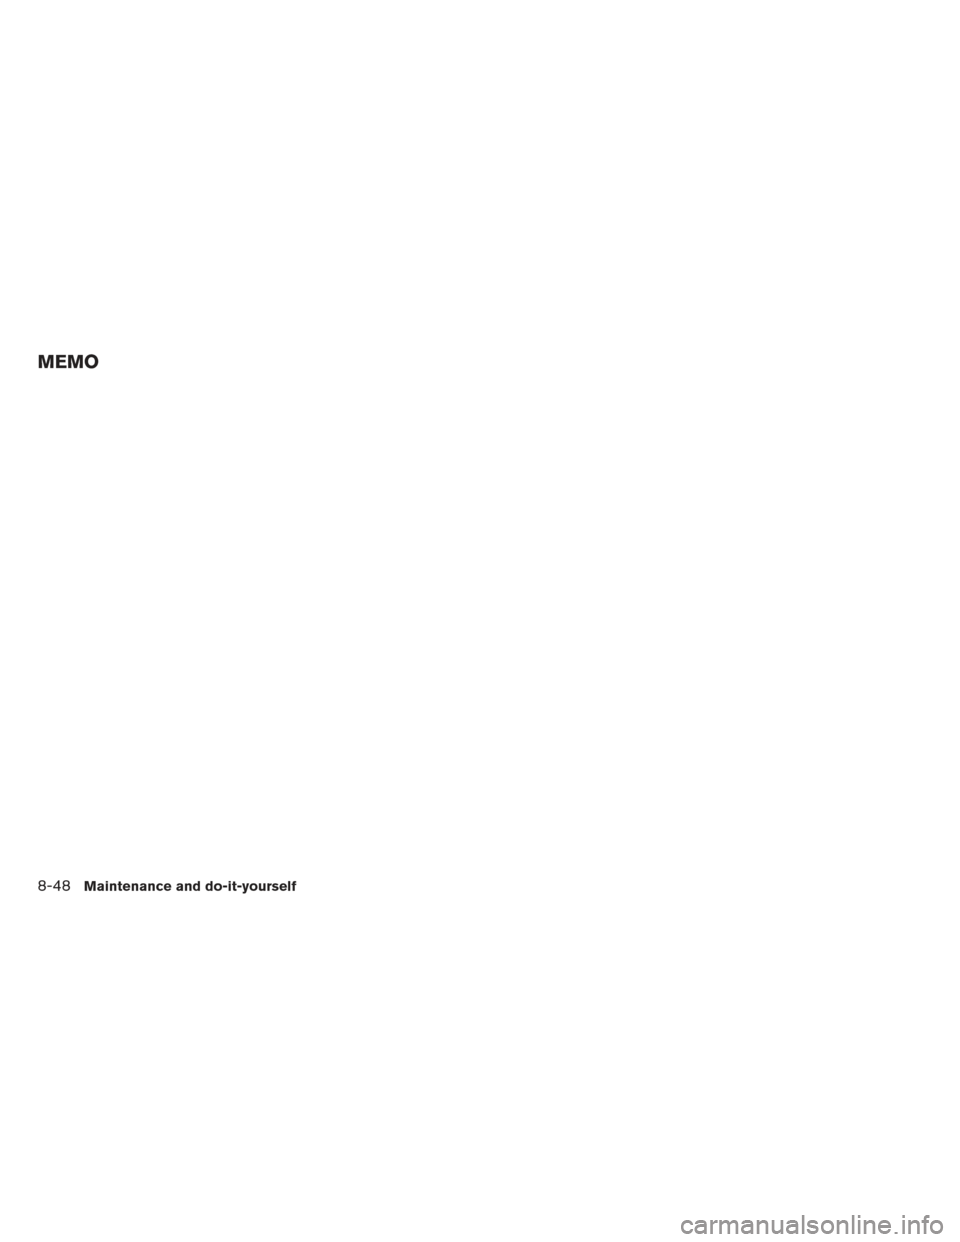 NISSAN ALTIMA 2013 L33 / 5.G Owners Manual MEMO
8-48Maintenance and do-it-yourself 